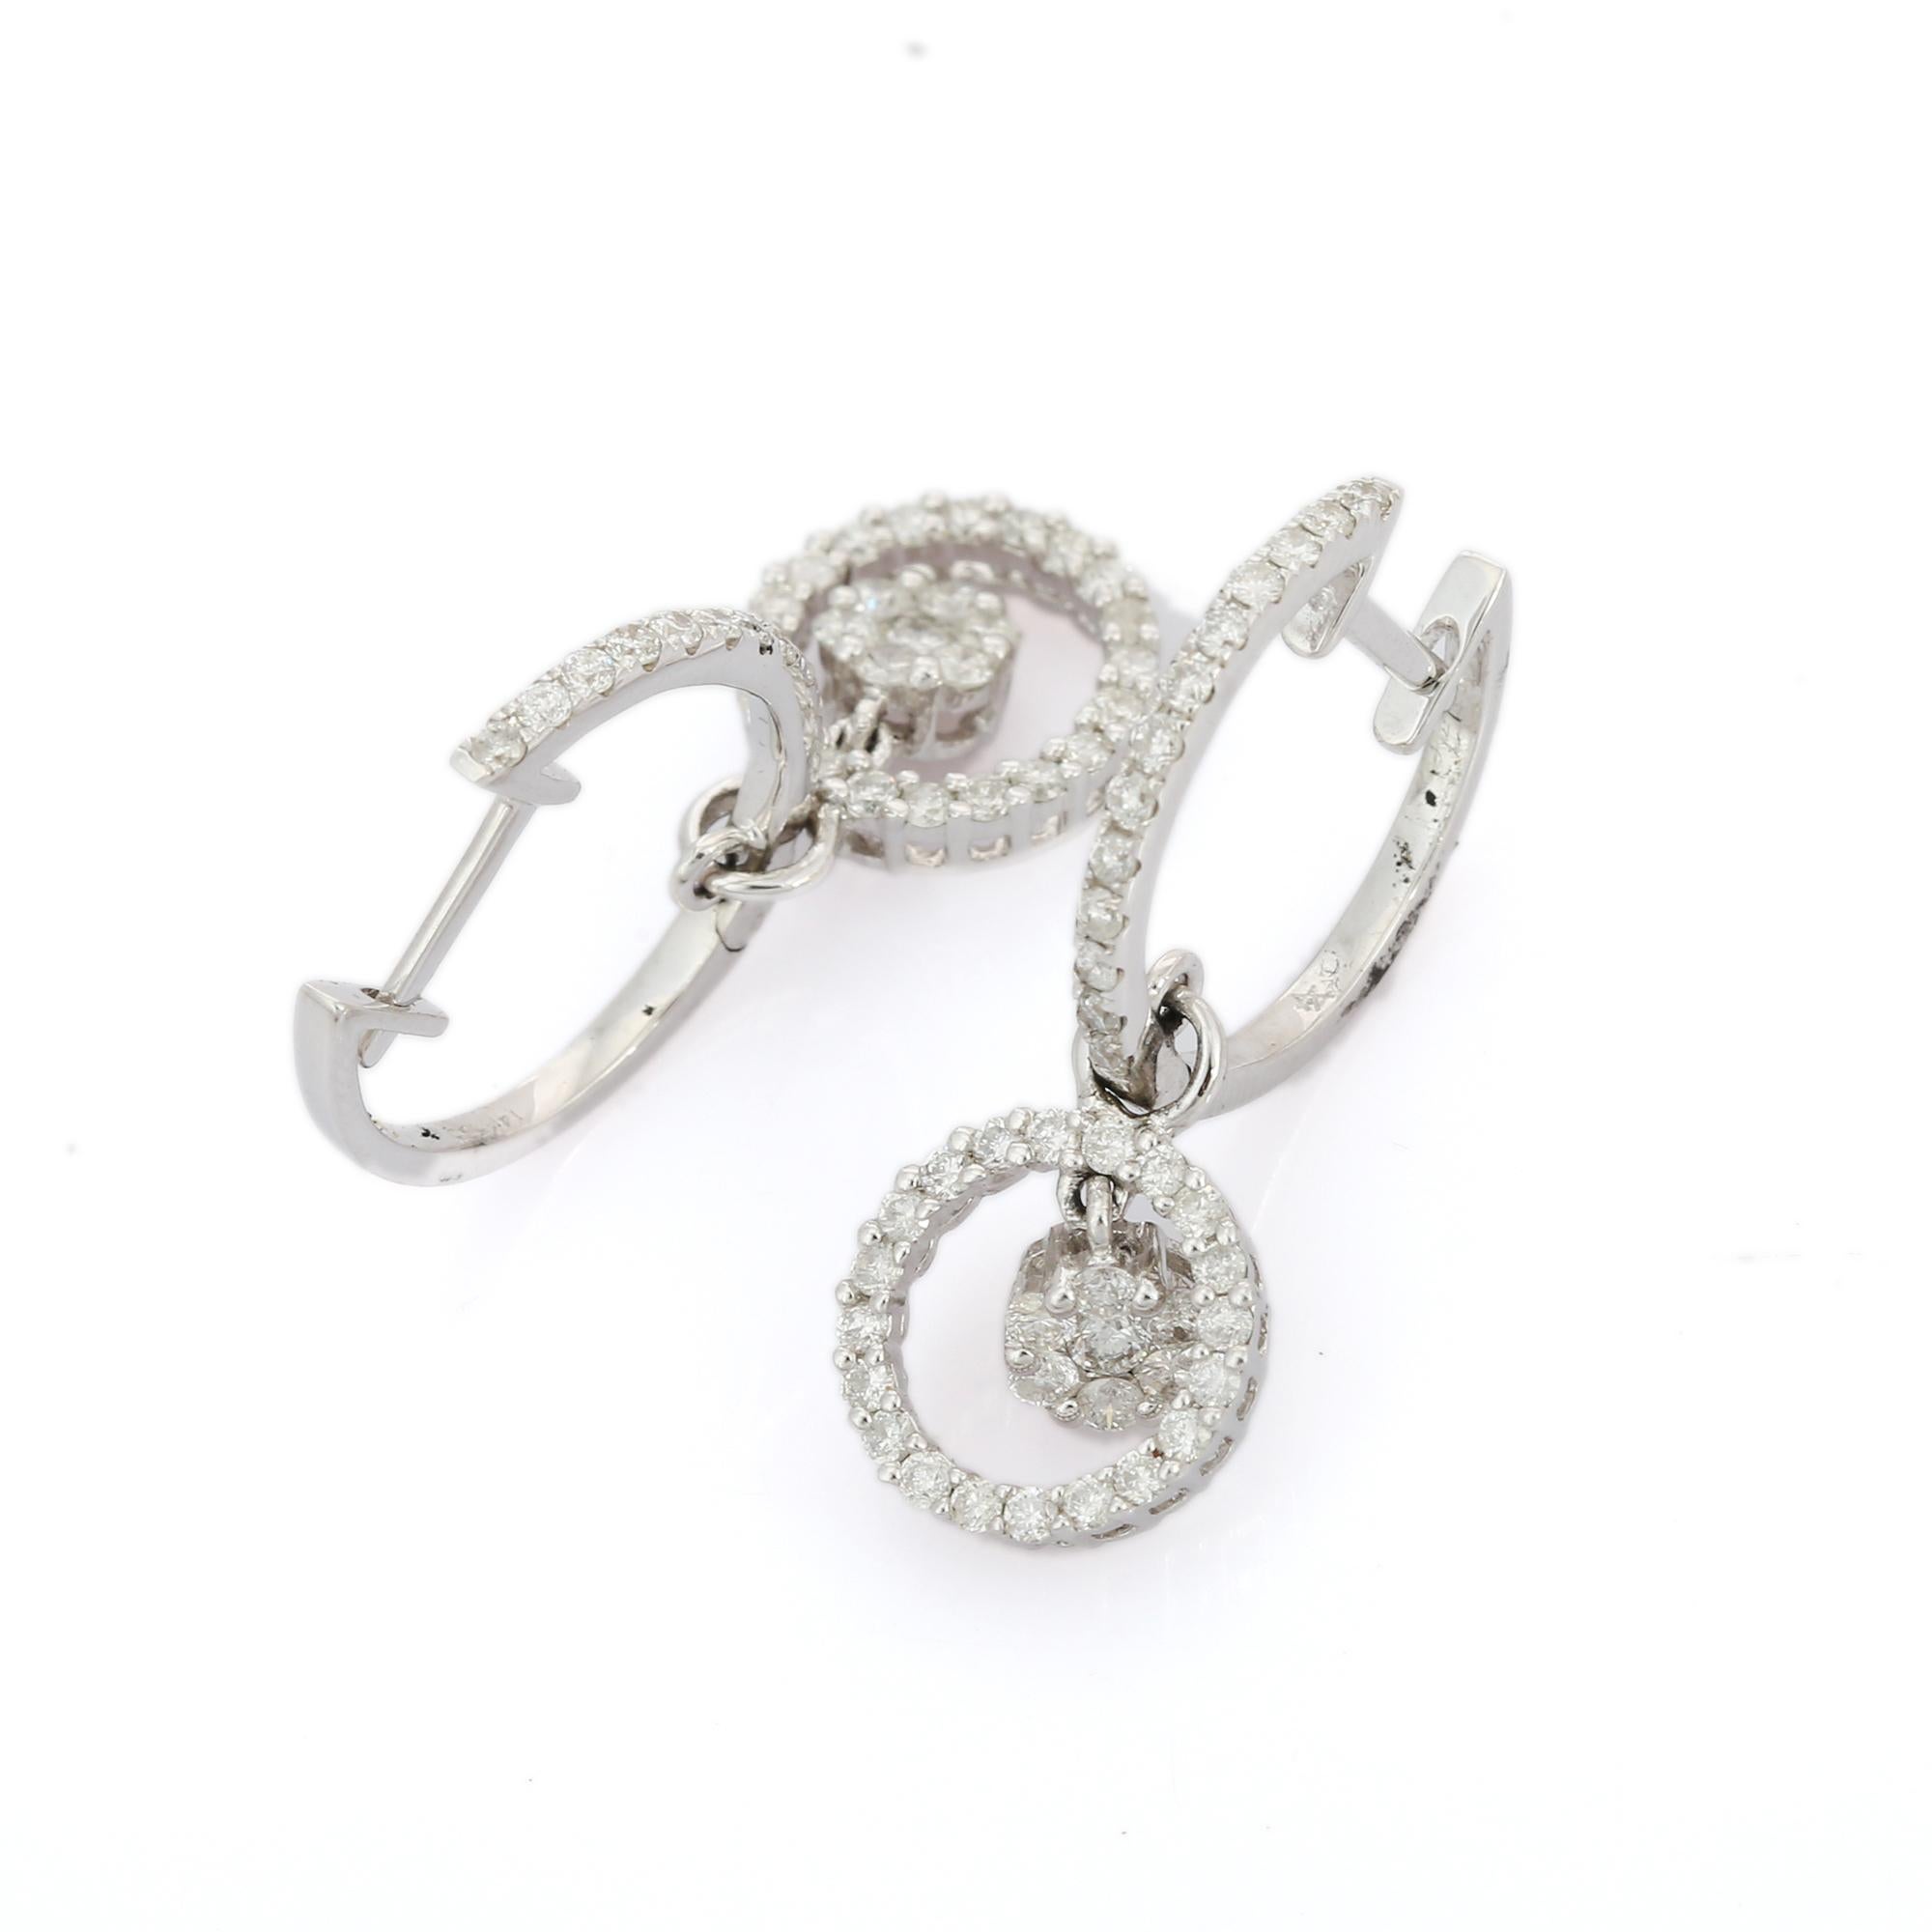 14K White Gold Diamond Clip-On earrings to make a statement with your look. These earrings create a sparkling, luxurious look featuring round cut diamonds. Diamonds are known for their ability to improve one's health and intelligence. 
If you love